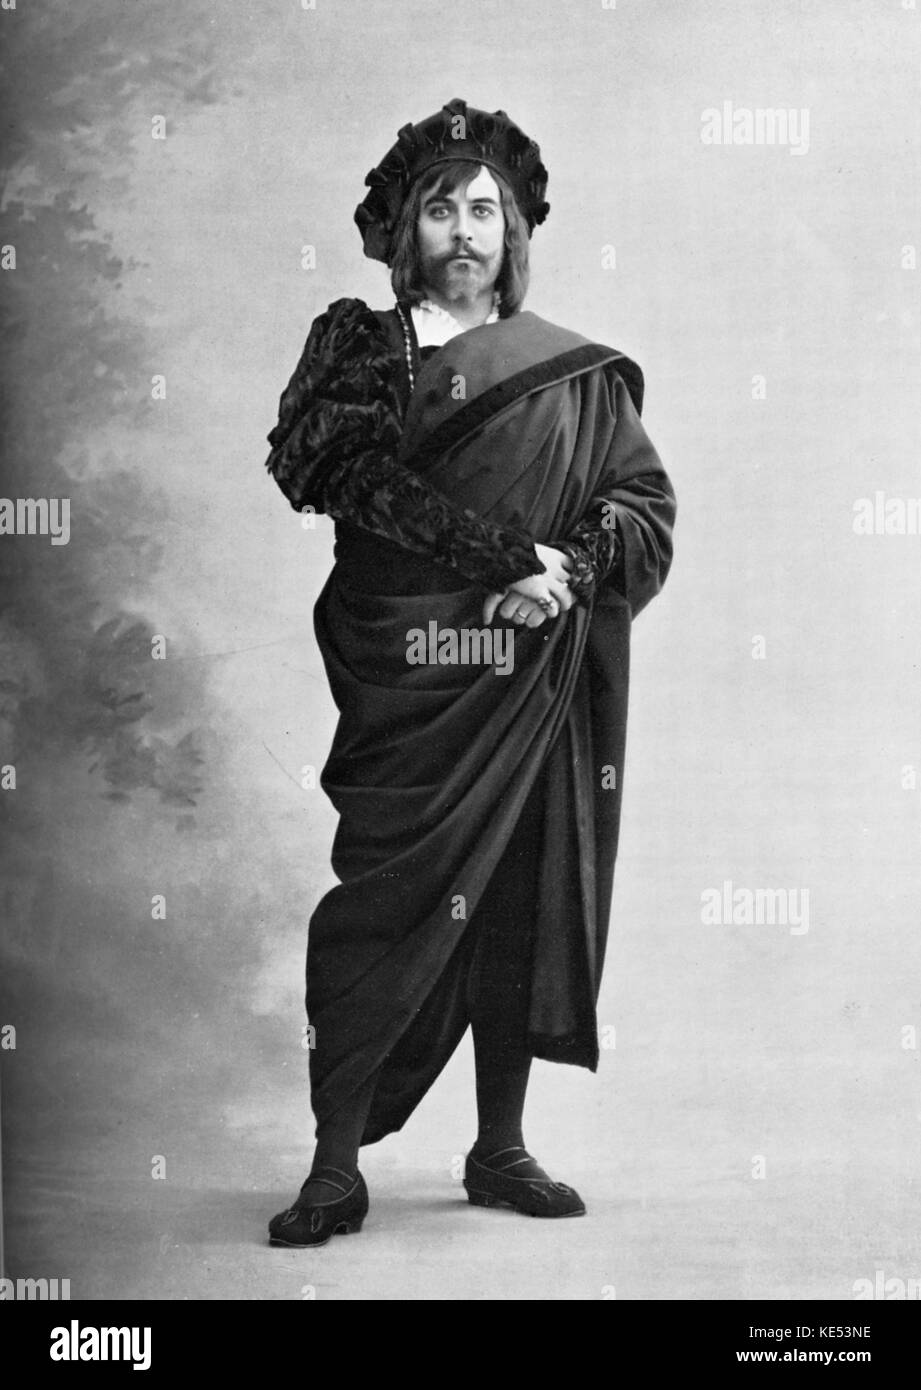 Maurice Renaud in title role in 'Hamlet'  by Ambroise Thomas at the Opera. Le Theatre no 136, Agoust 1904. MR: French operatic baritone 1860? - 1933. Photo by Du Guy. French composer, 5 August 1811 - 12 February 1896. Stock Photo